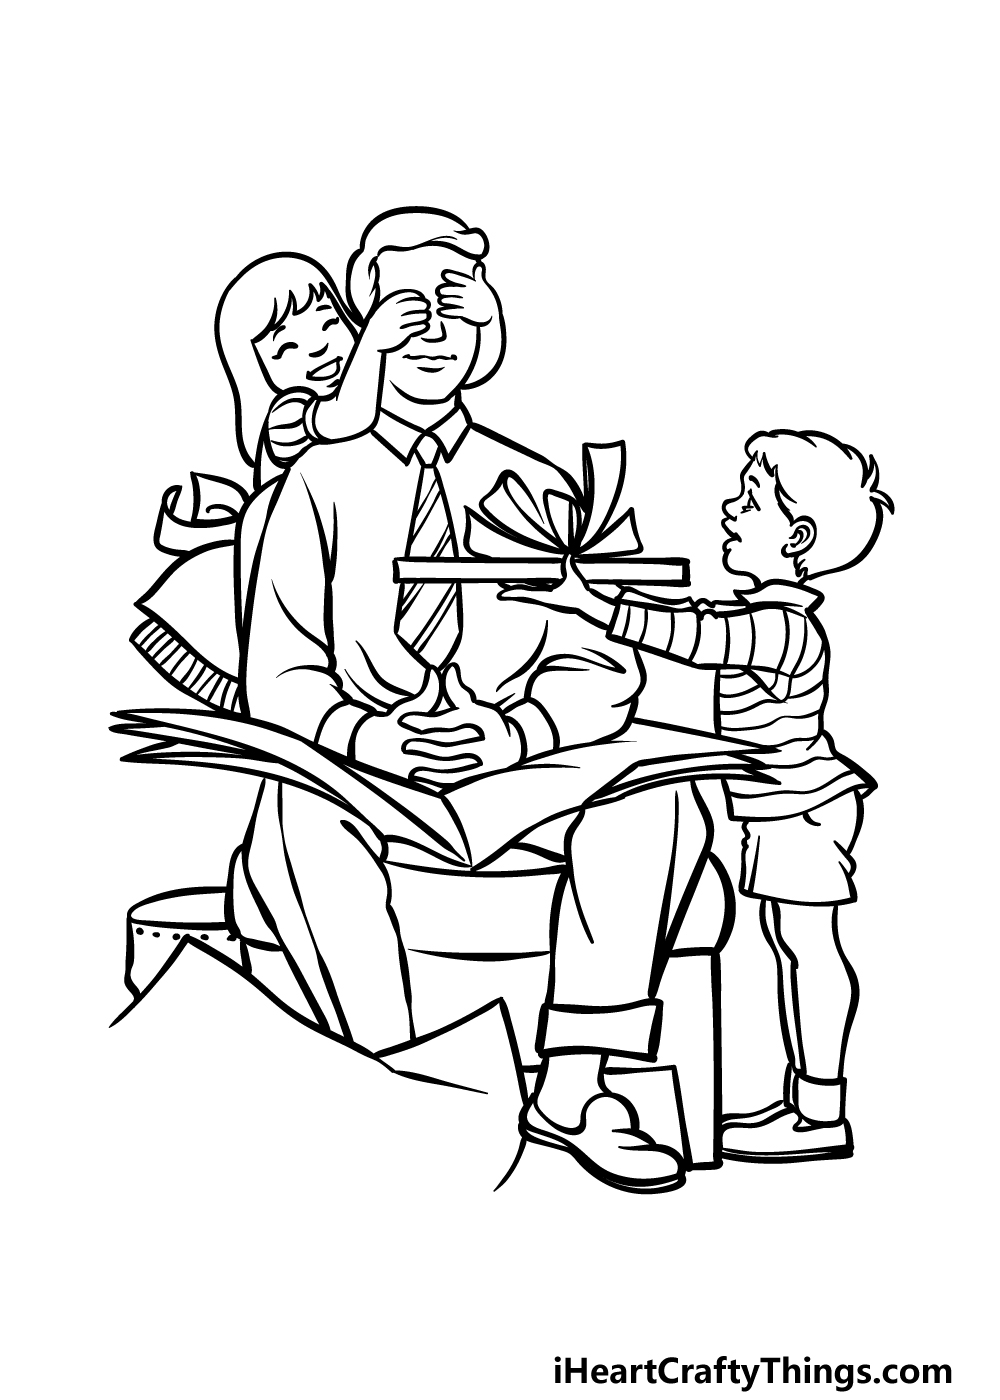 Best Dad Drawing for Fathers Day Coloring Page | Easy Drawing Guides-saigonsouth.com.vn